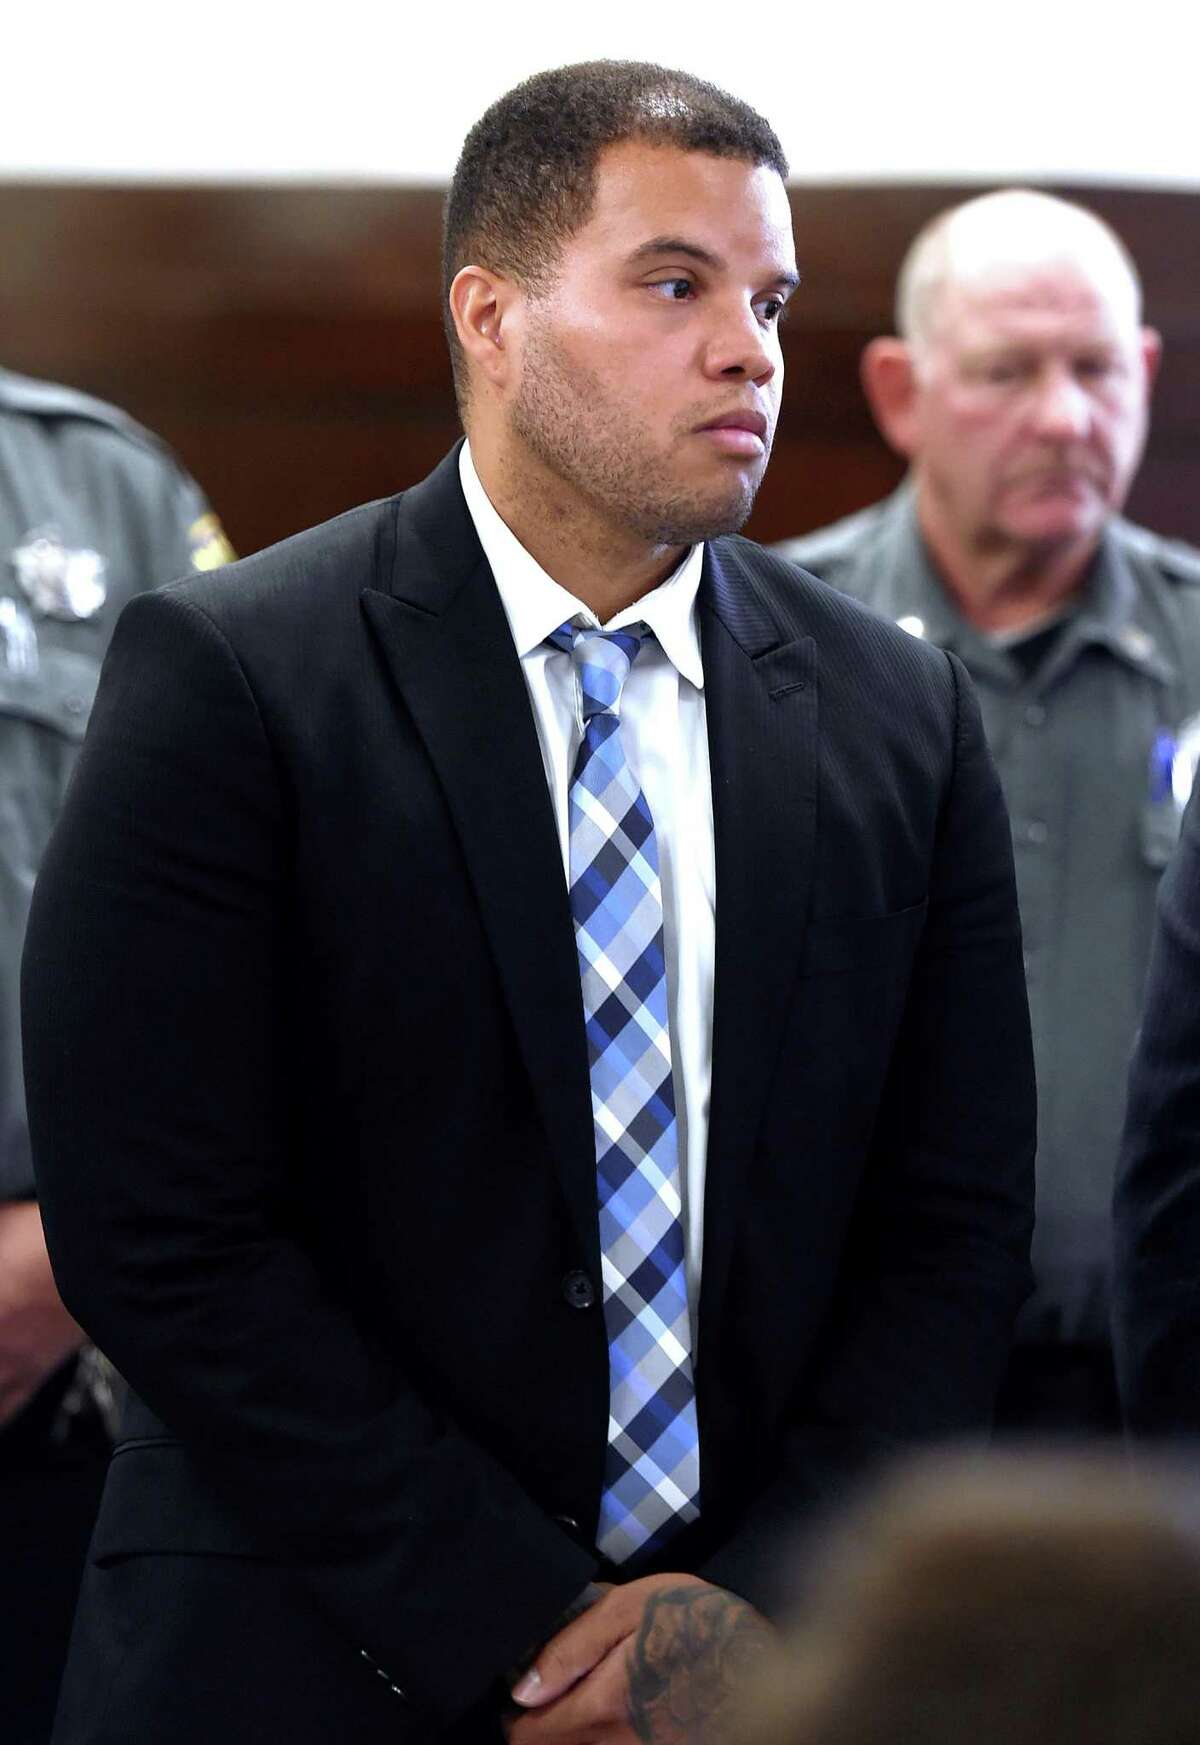 Hamden police Officer Devin Eaton is arraigned in Superior Court in New Haven Monday on charges of first- degree assault and two counts of first-degree reckless endangerment .